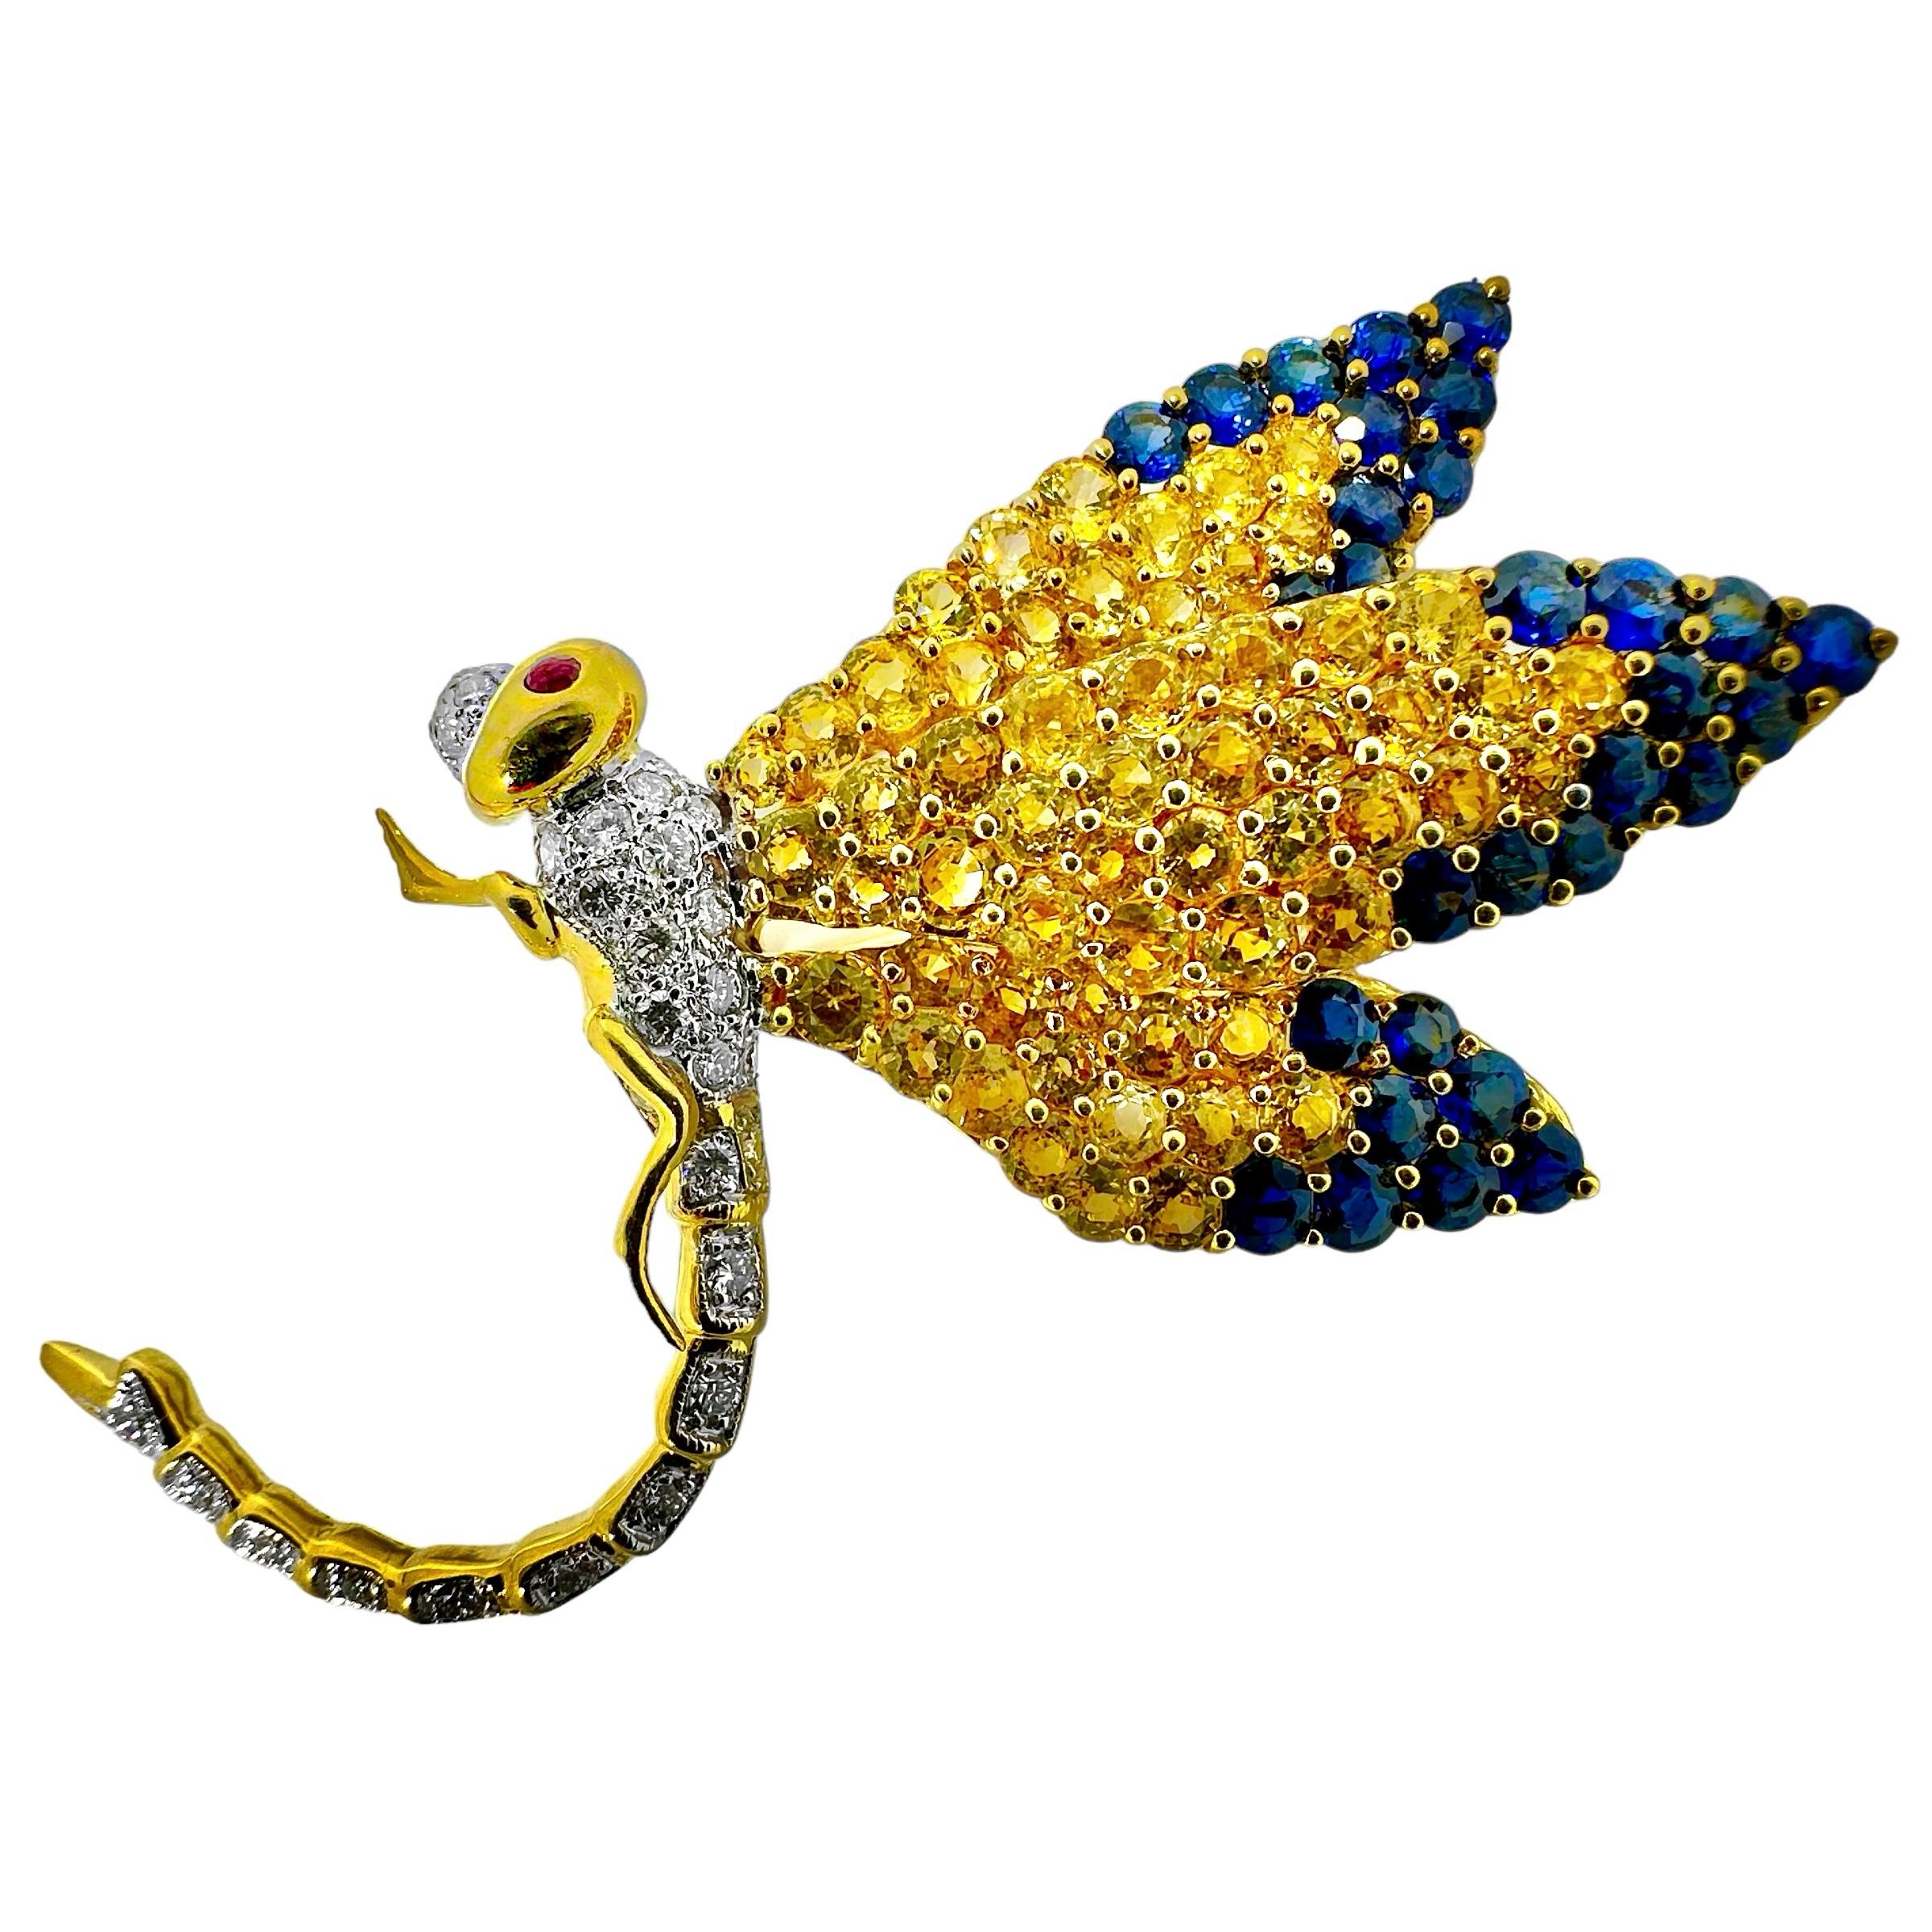 This life like characterization of a dragonfly in flight is lavishly embellished with over 130 round faceted golden and blue sapphires as well as a number of round brilliant cut diamonds. Total approximate sapphire weight is 7.00ct and total